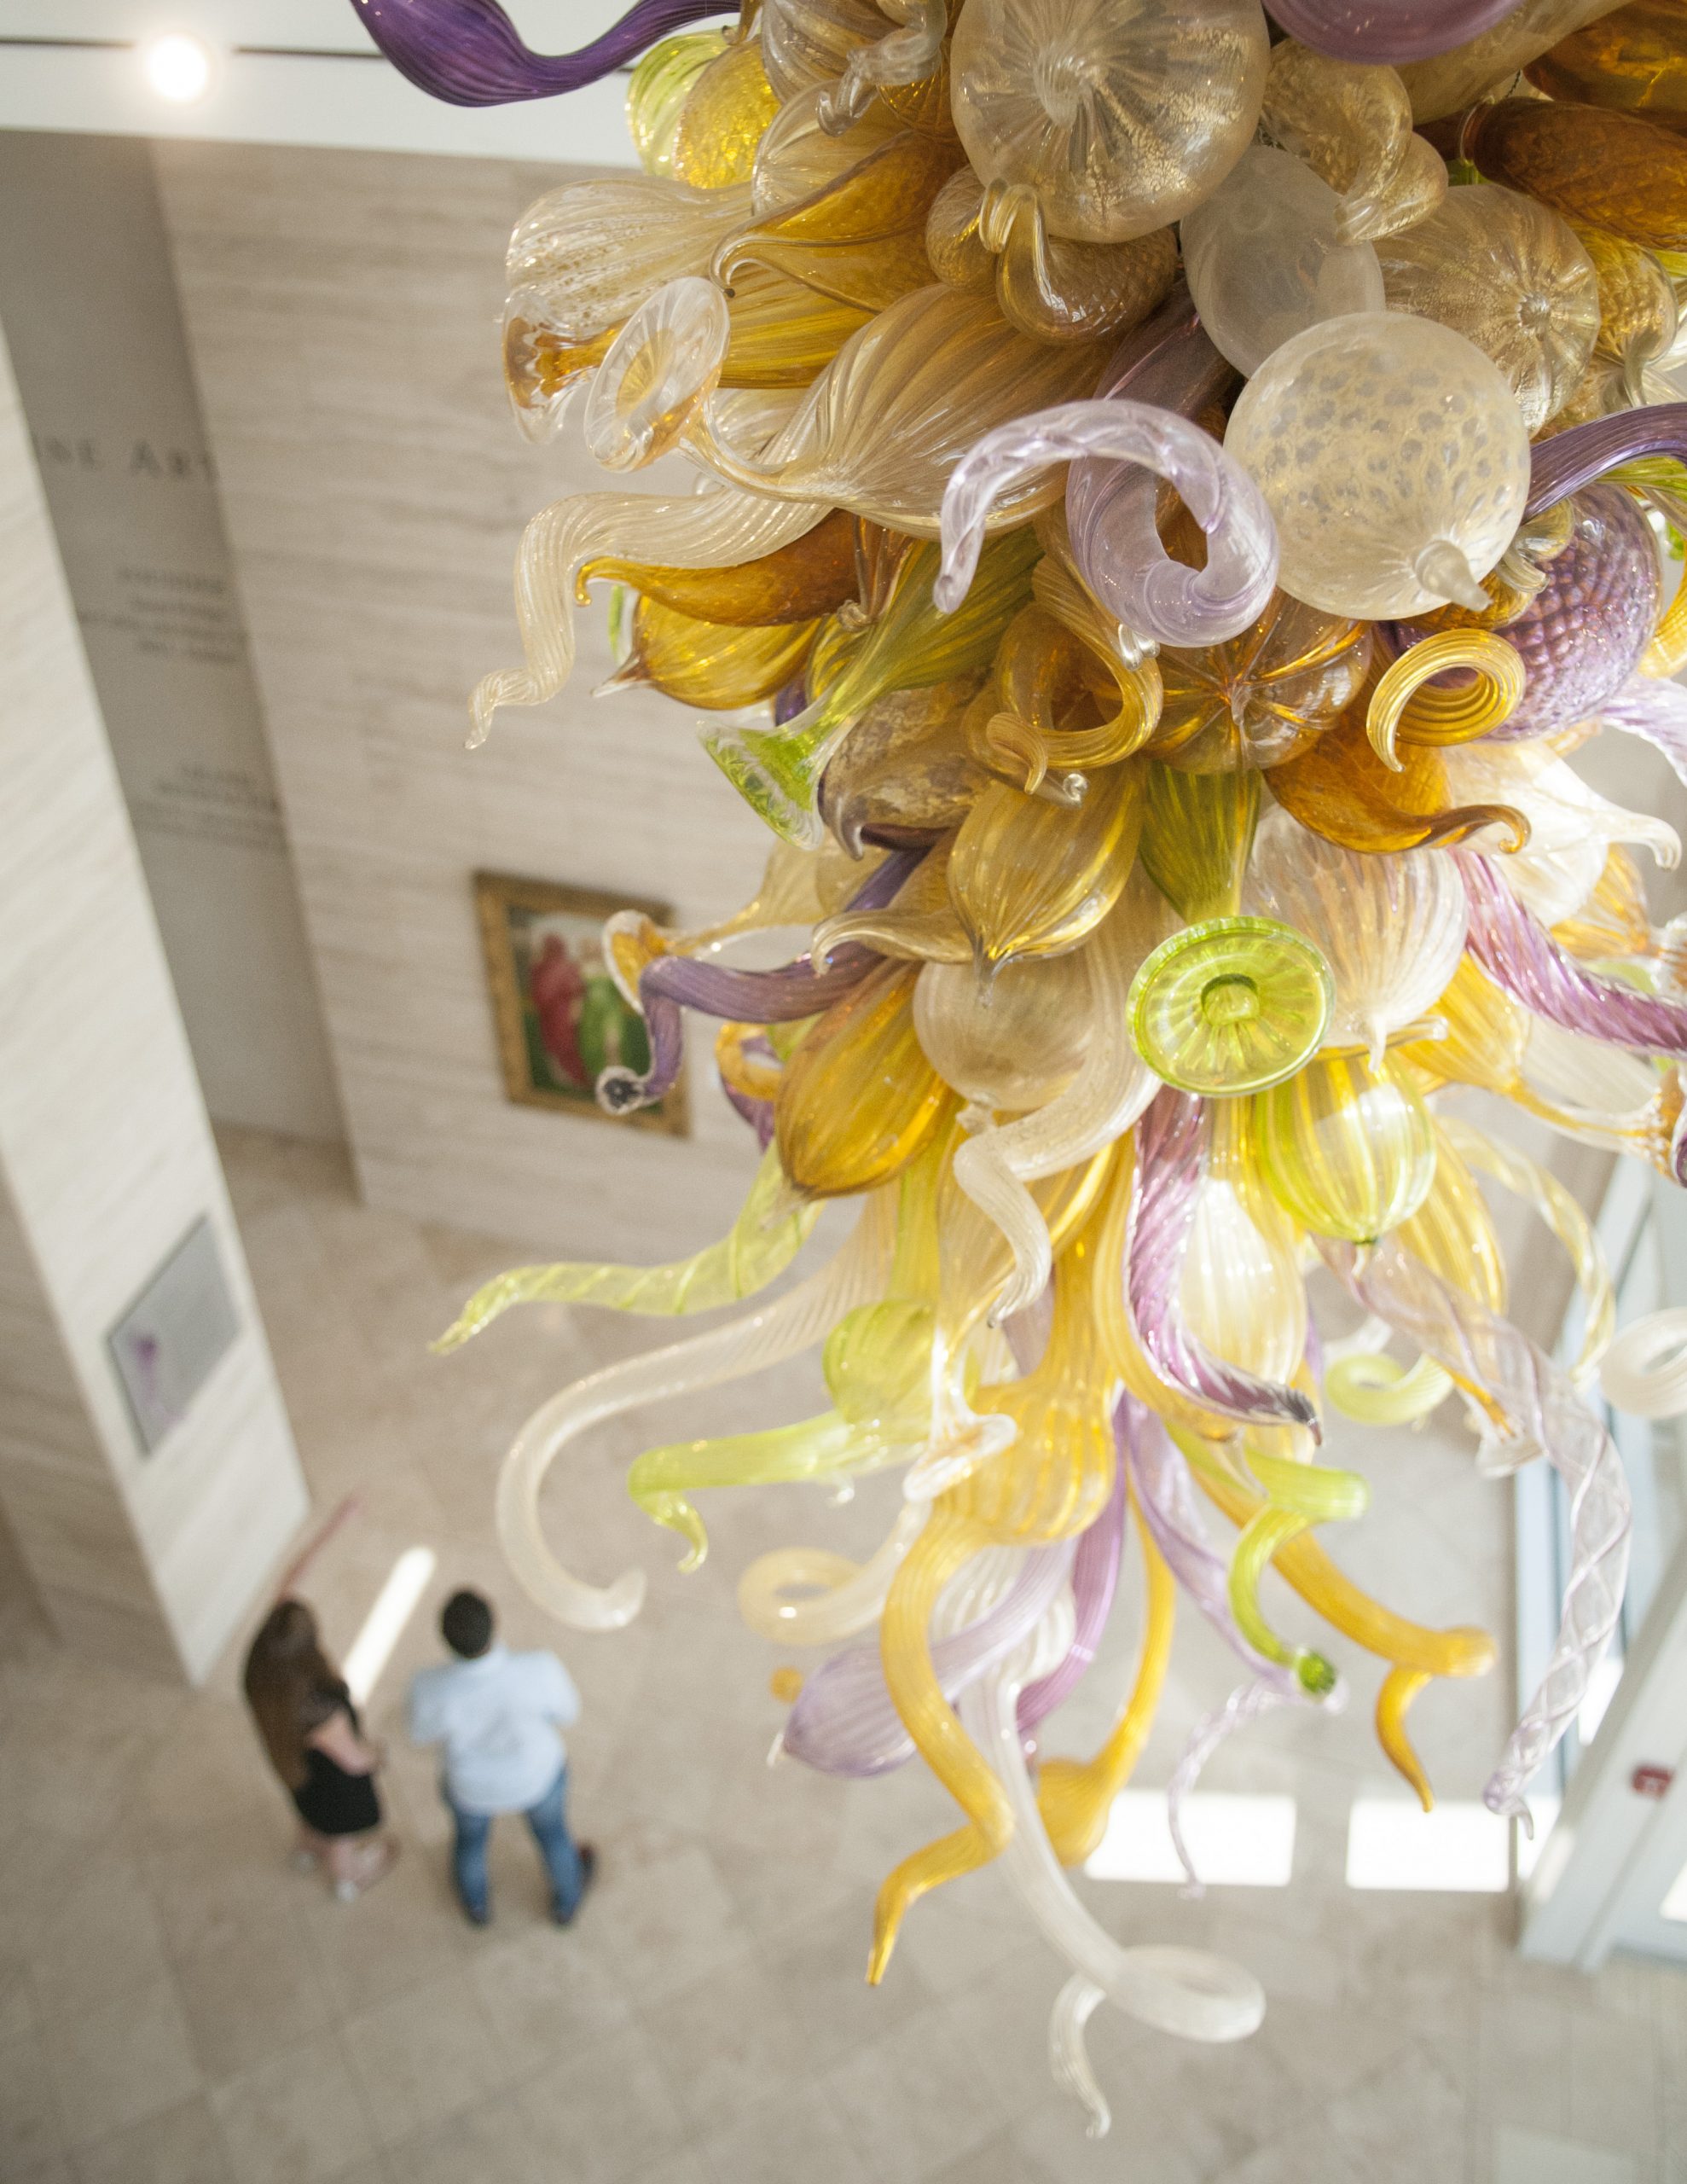 An aerial view of an intricate glass sculpture that hangs above two people.